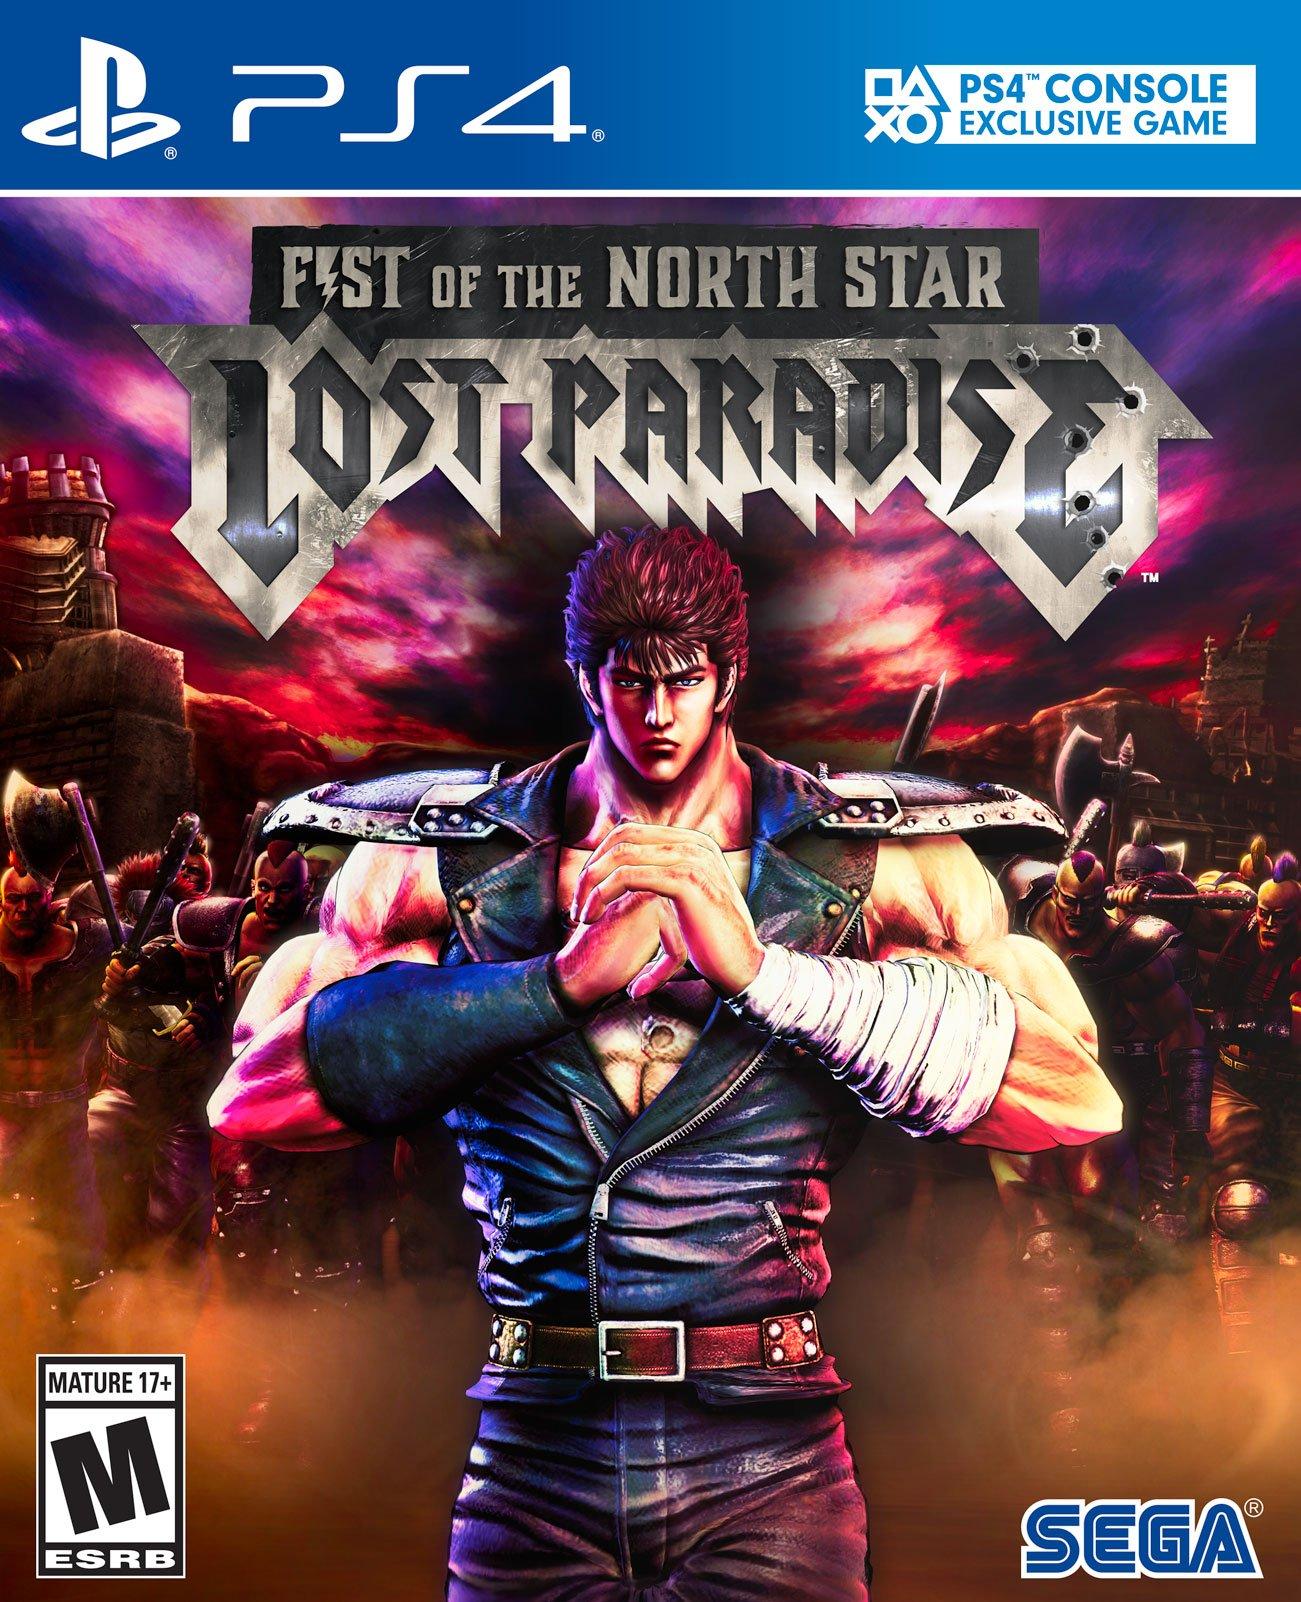 fist of the north star lost paradise sales